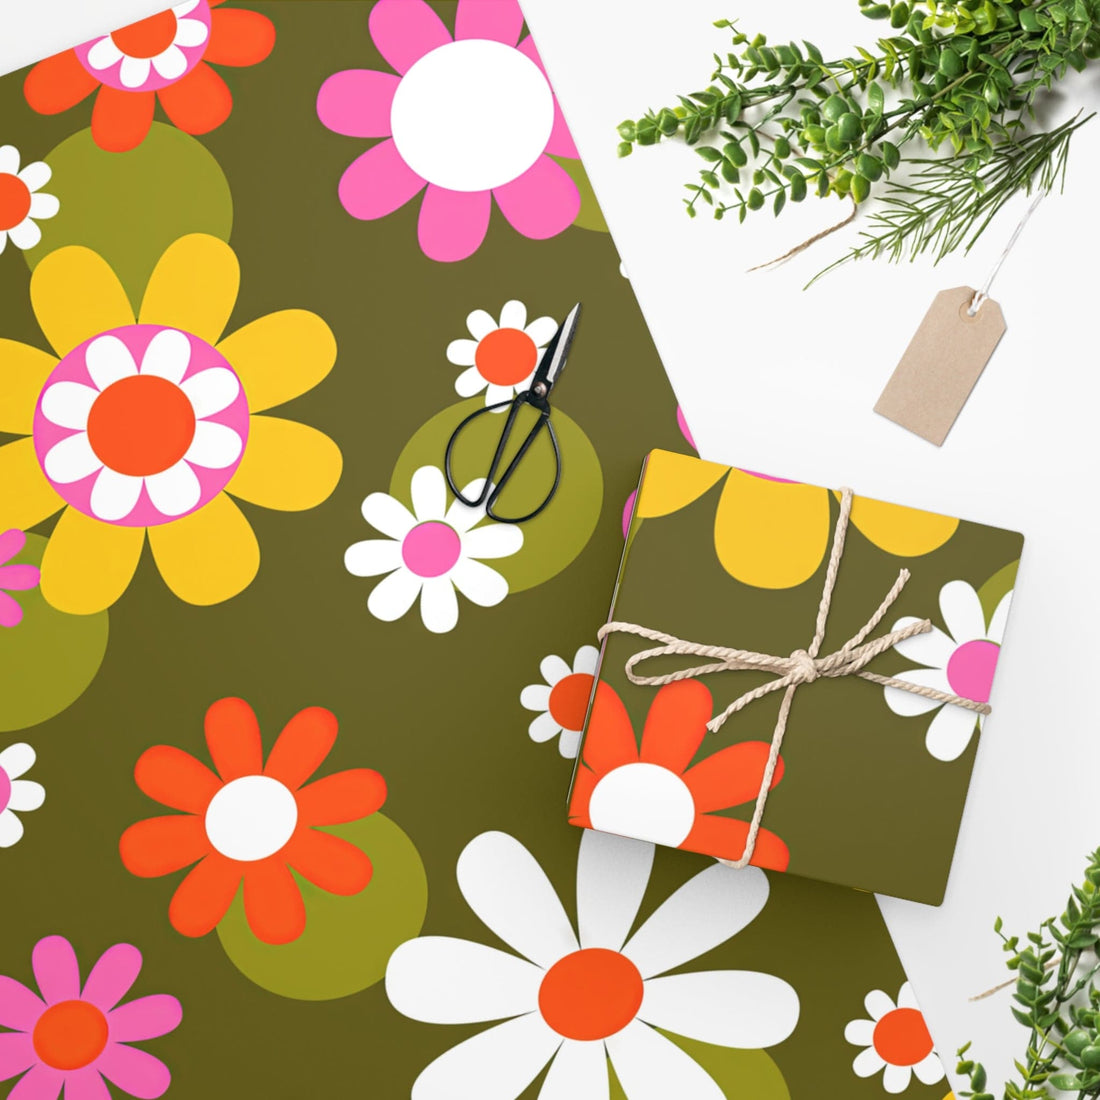 Kate McEnroe New York Groovy Hippie Daisy Flower Power Wrapping Paper, Mid Century Modern Retro Gift WrapWrapping Paper11859082243321882187